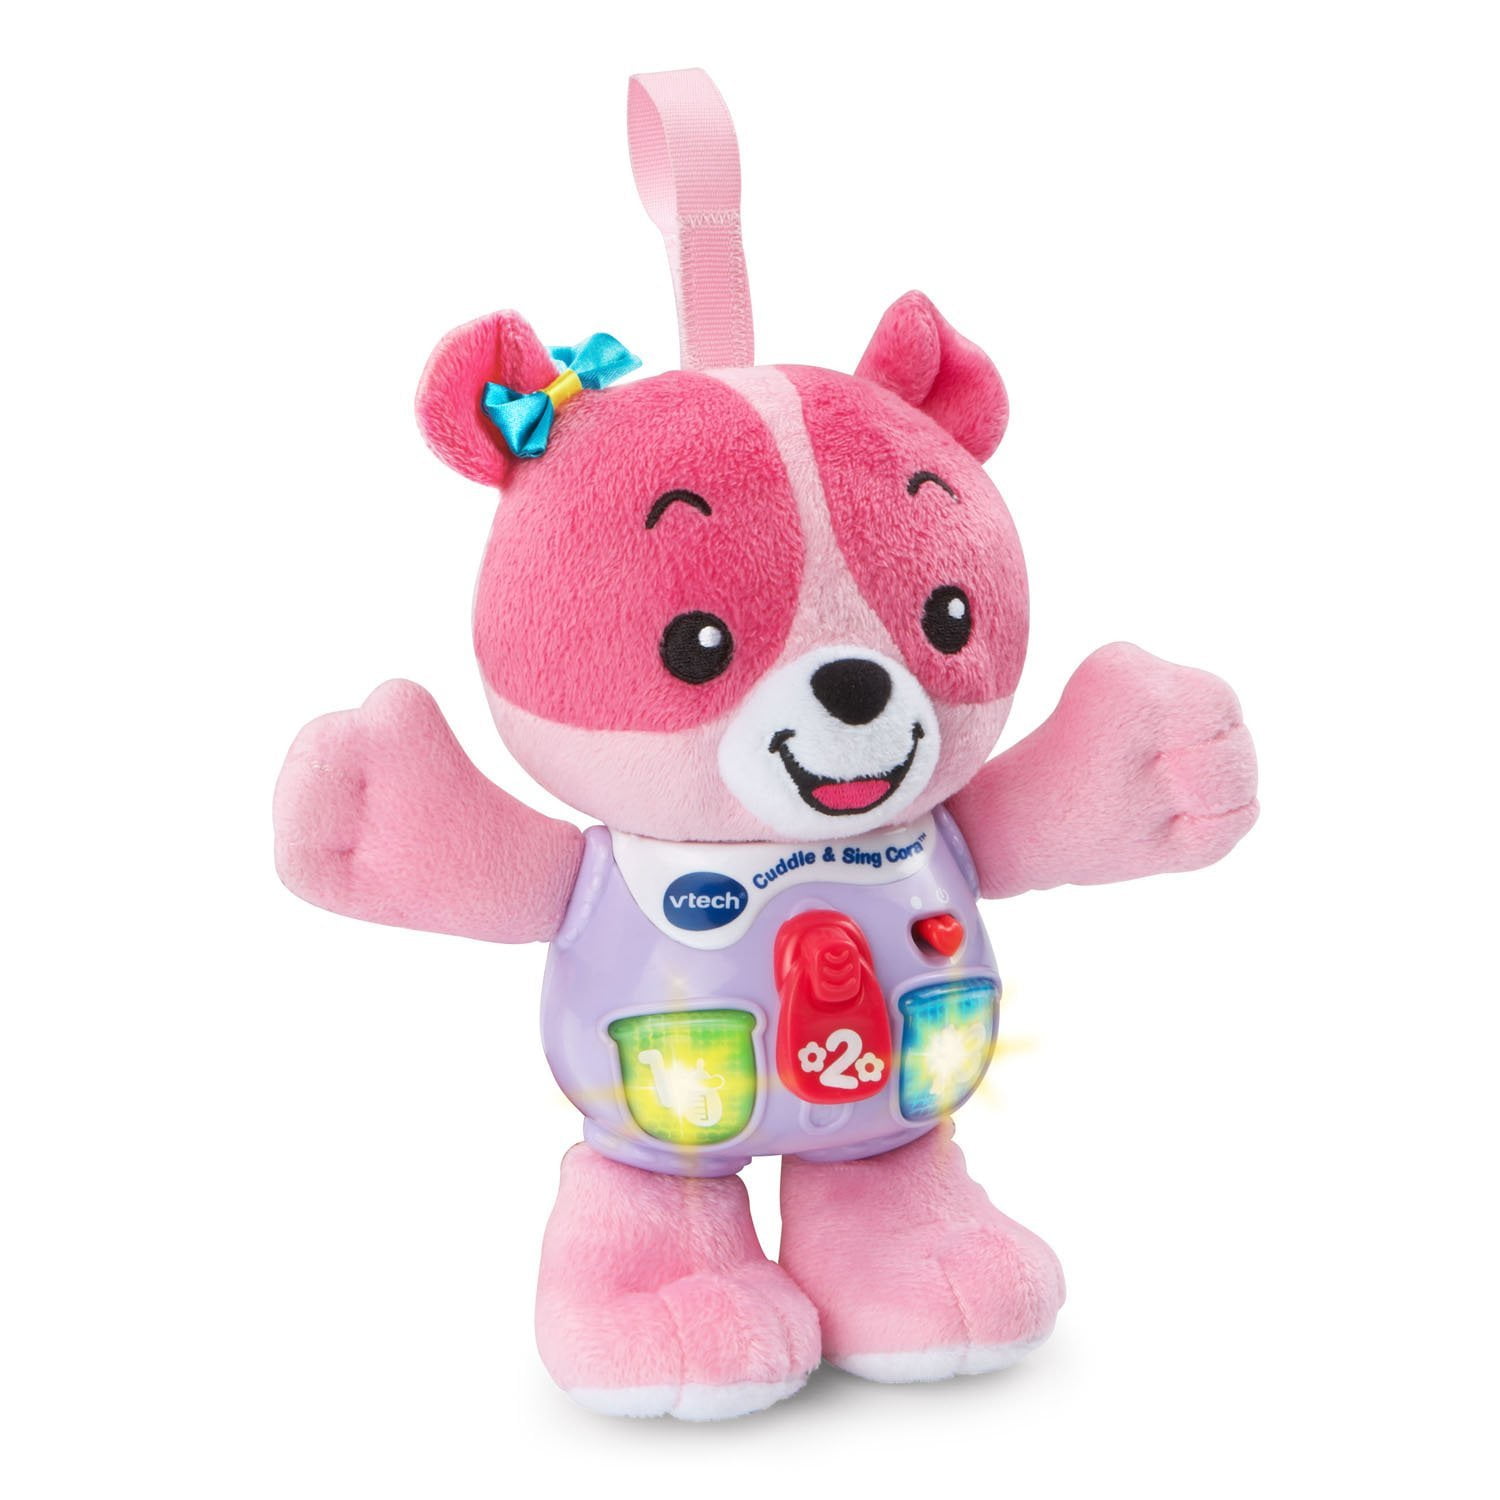 Sing Cora, Teddy bear toy engages 